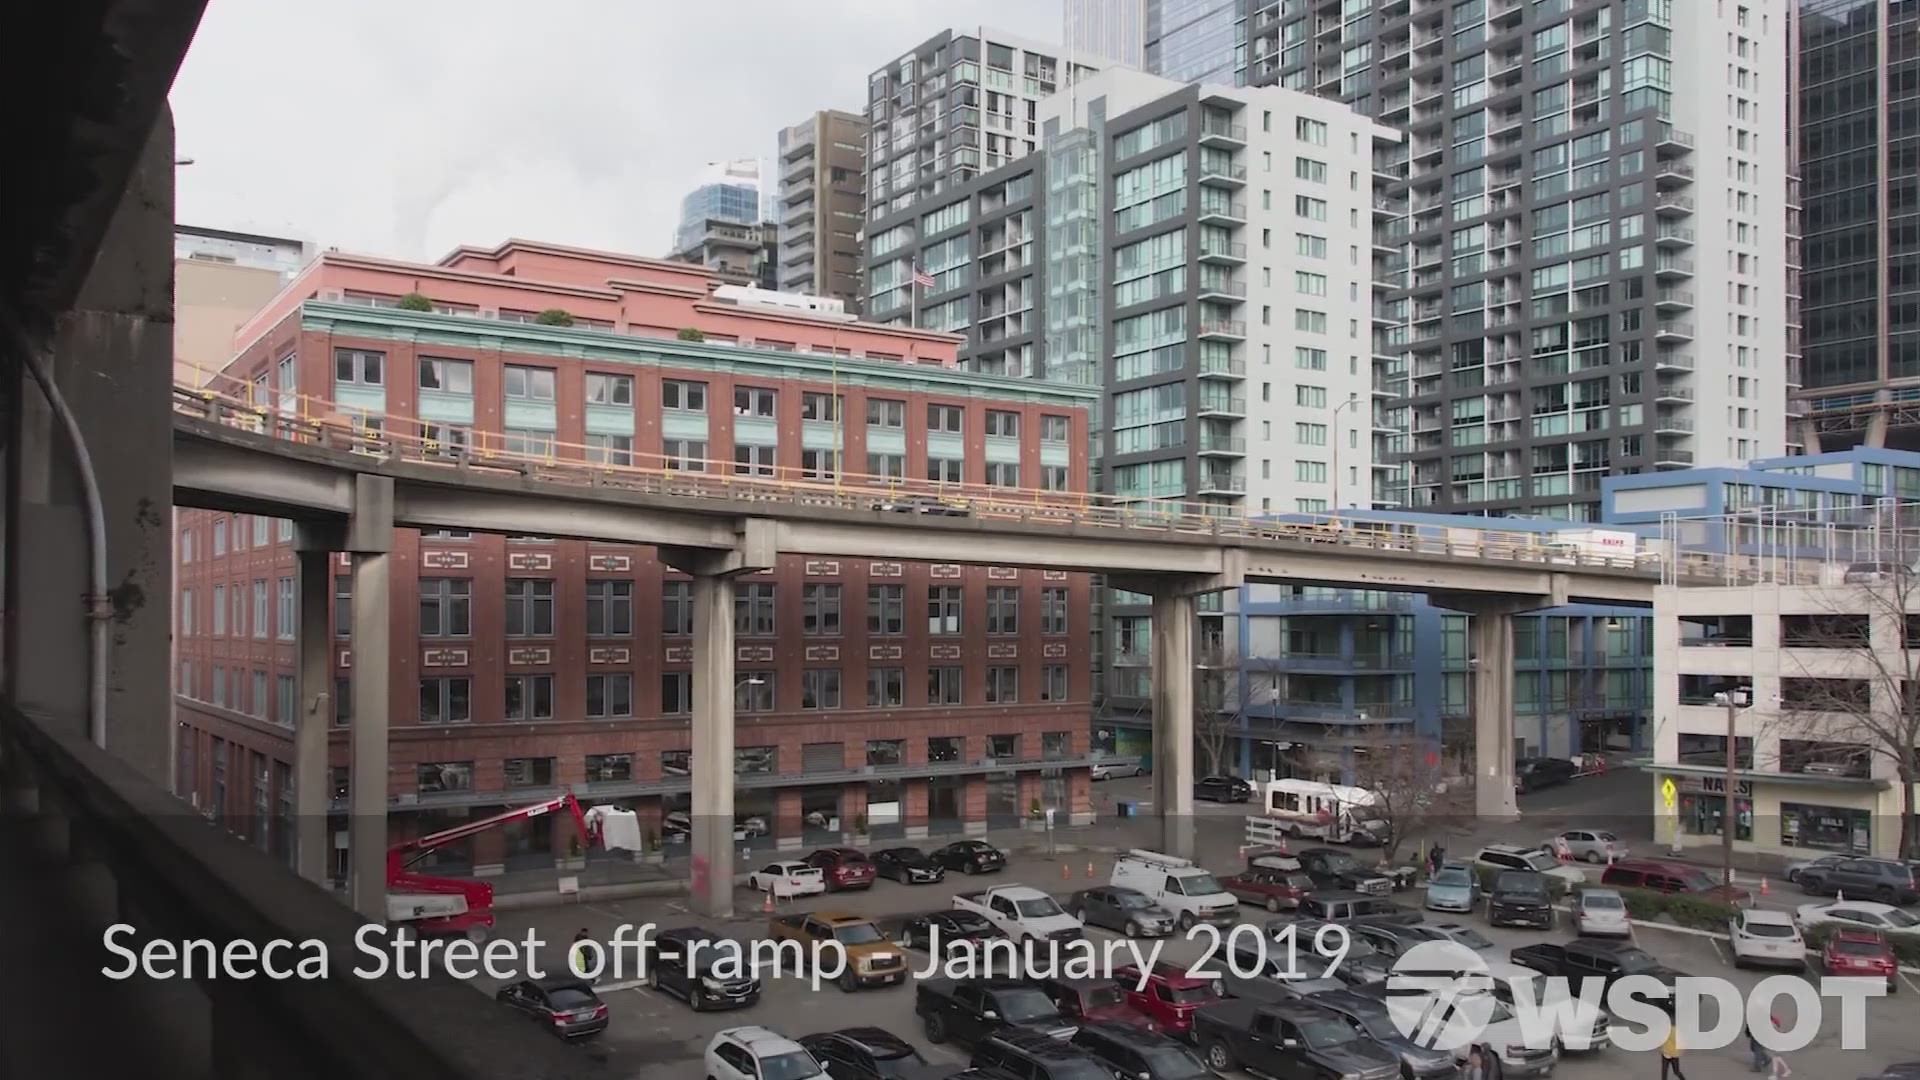 Timelapse video from the Washington State Department of Transportation shows how crews demolished the Seneca Street off-ramp from the Alaskan Way Viaduct in Seattle.